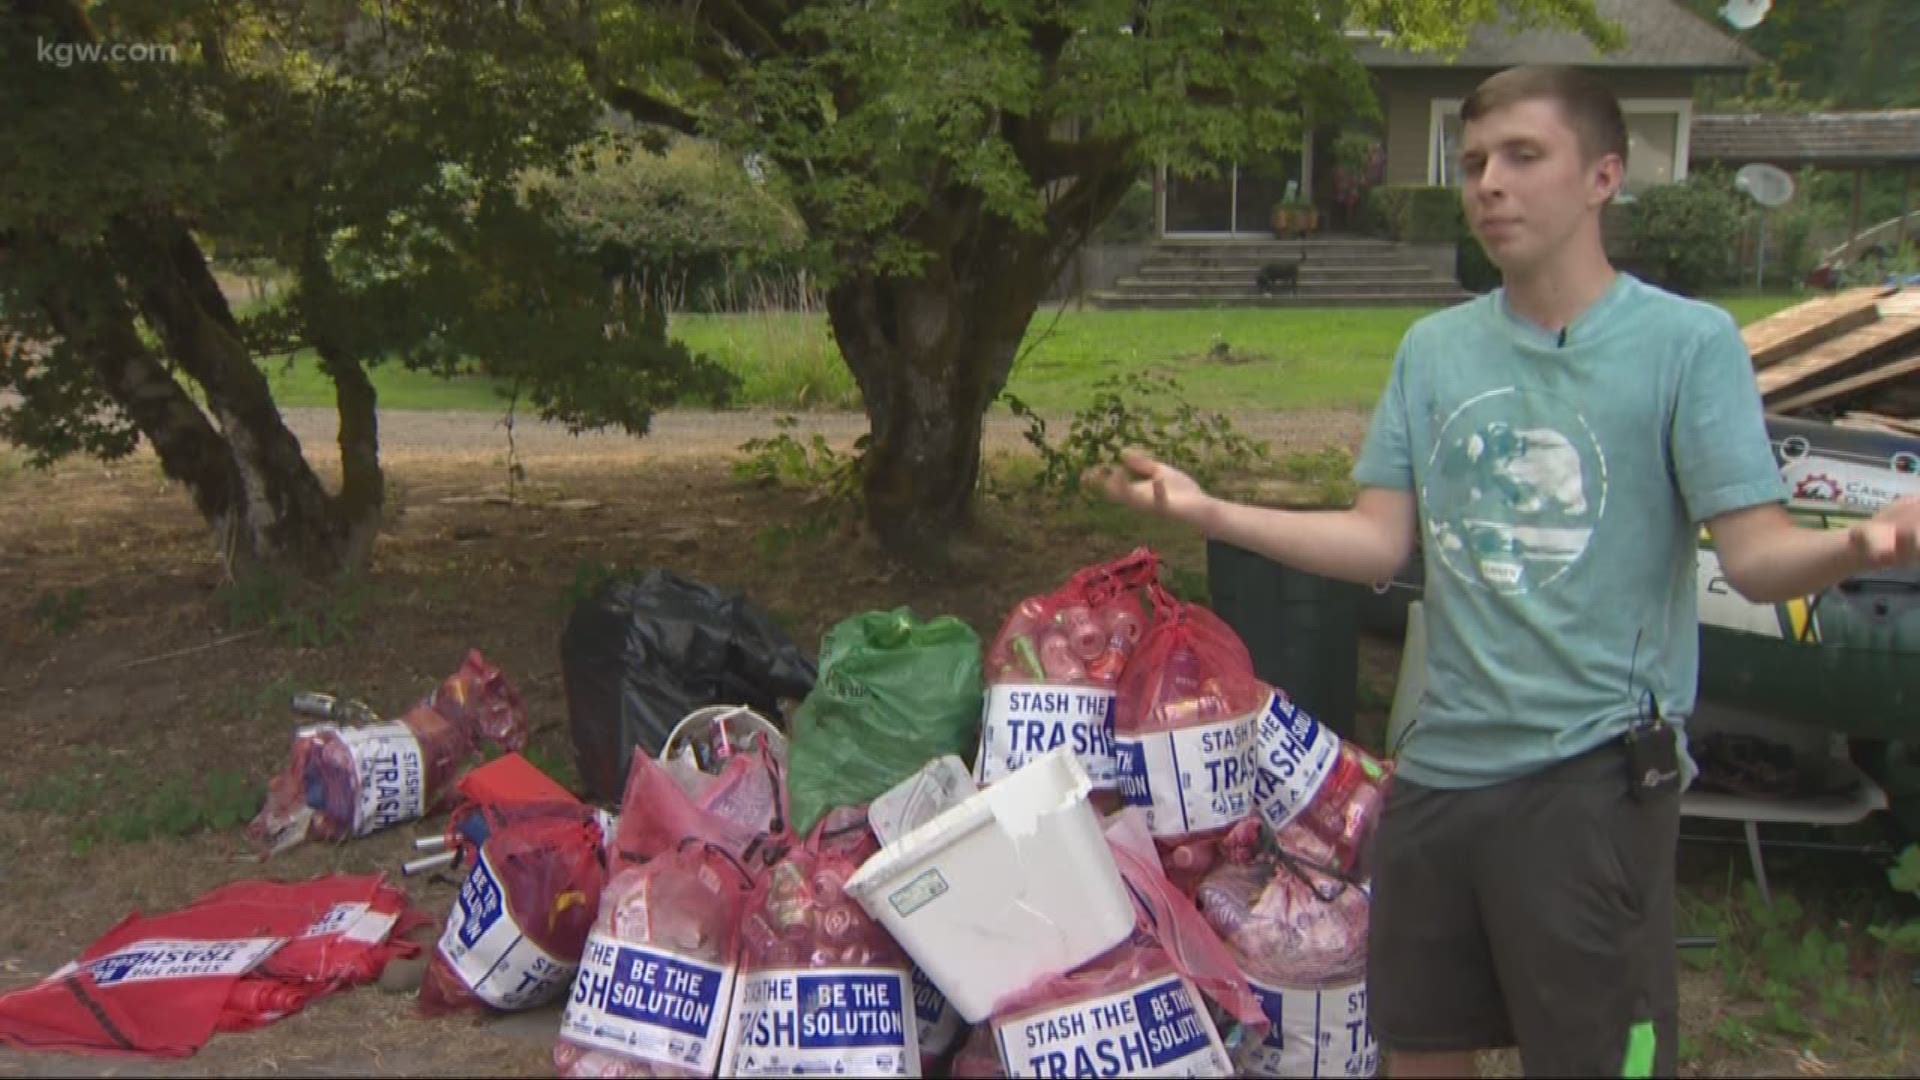 Man clears up garbage from Clackamas River